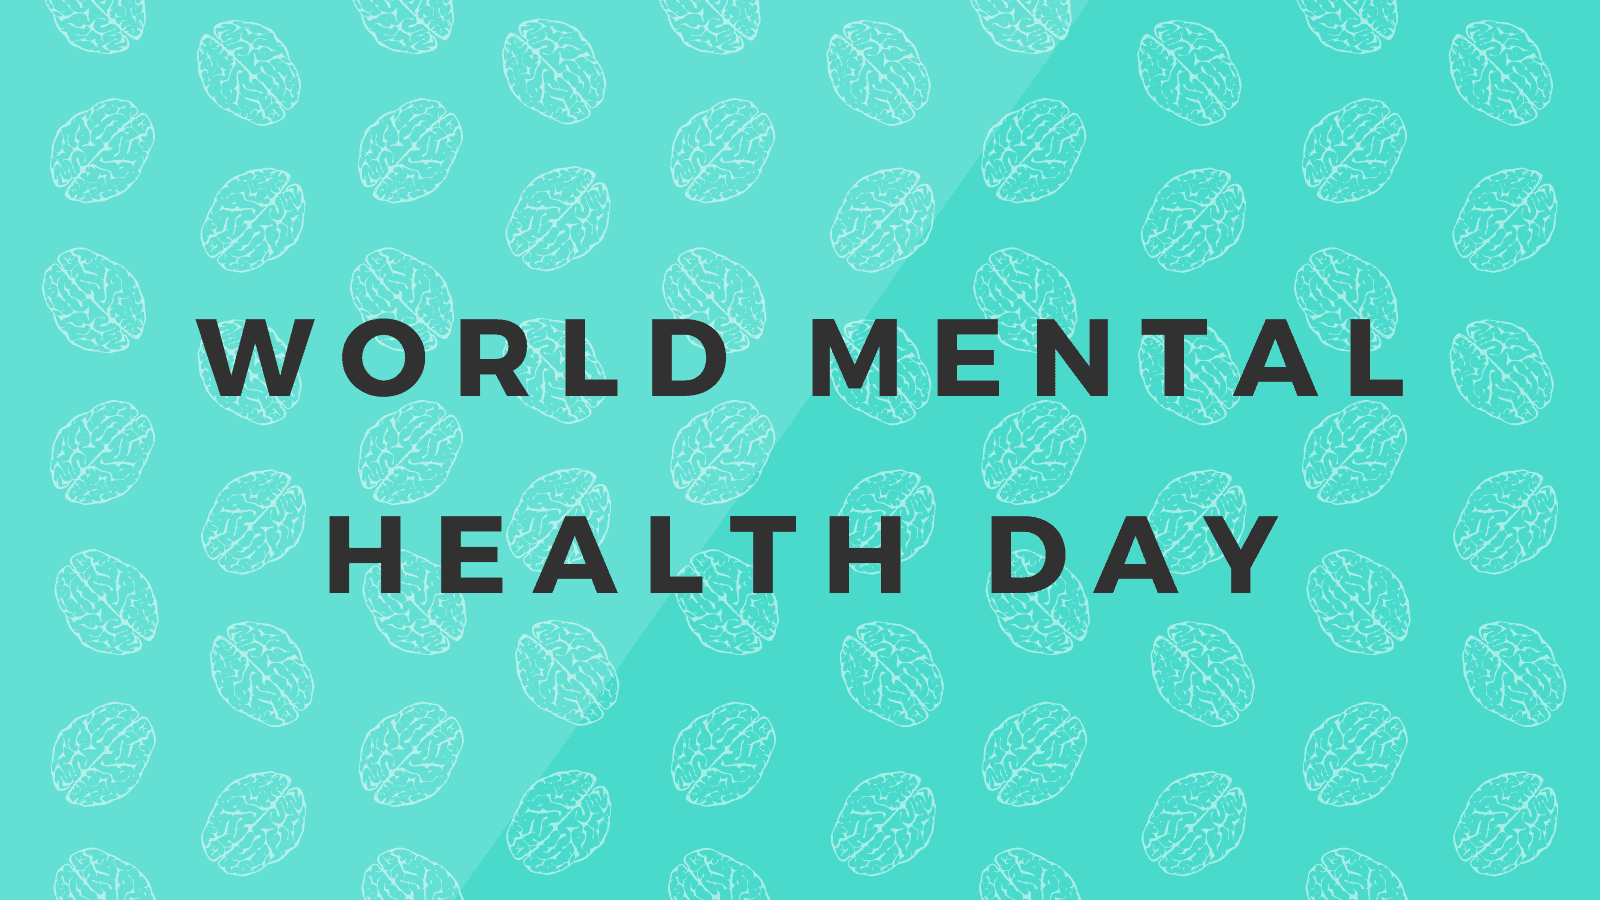 a background pattern made from the images of a brain and the words "World Mental Health Day".